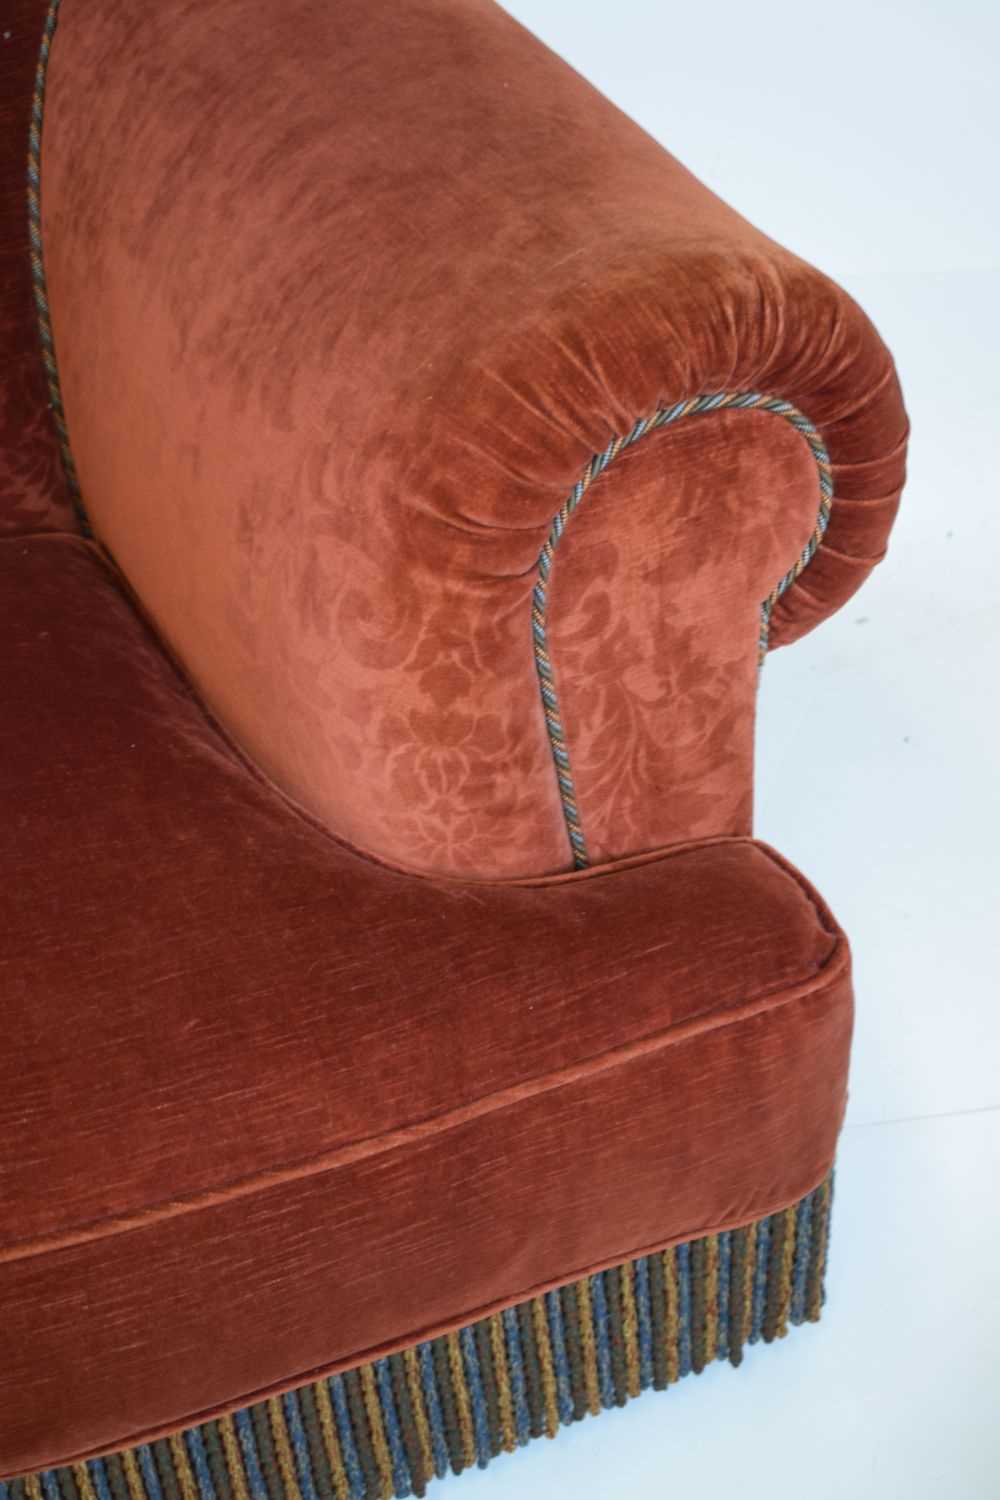 Tetrad 'Victoria' sofa in red covering - Image 4 of 5